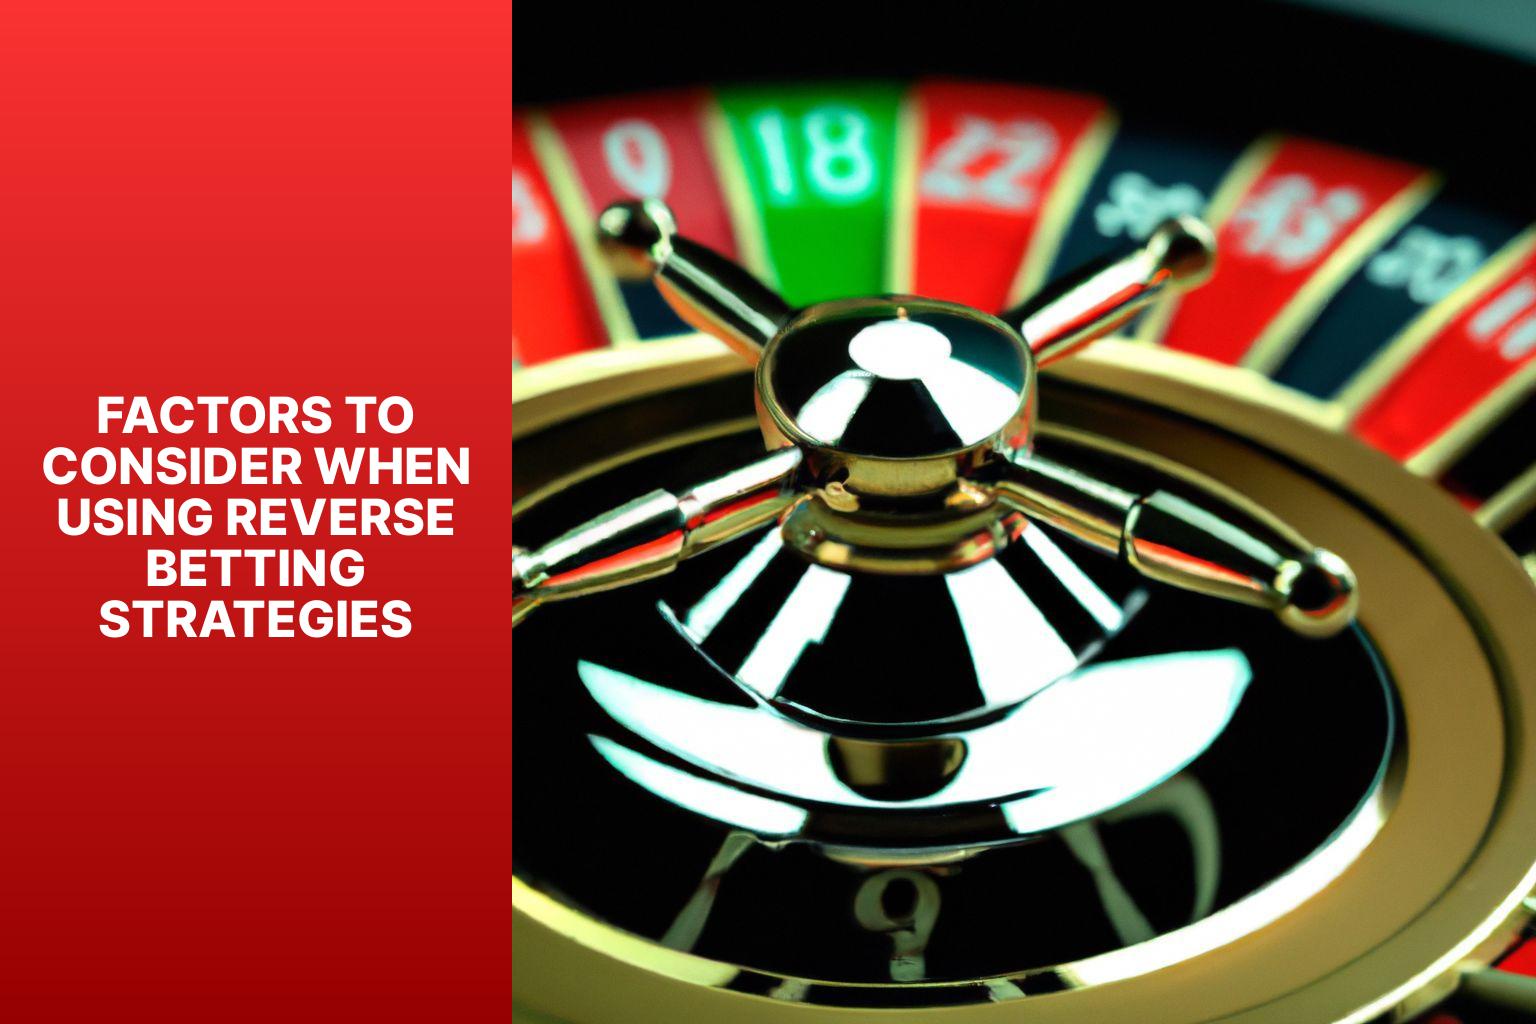 Factors to Consider When Using Reverse Betting Strategies - Reverse Betting Strategies: Flipping the Odds in Your Favor 